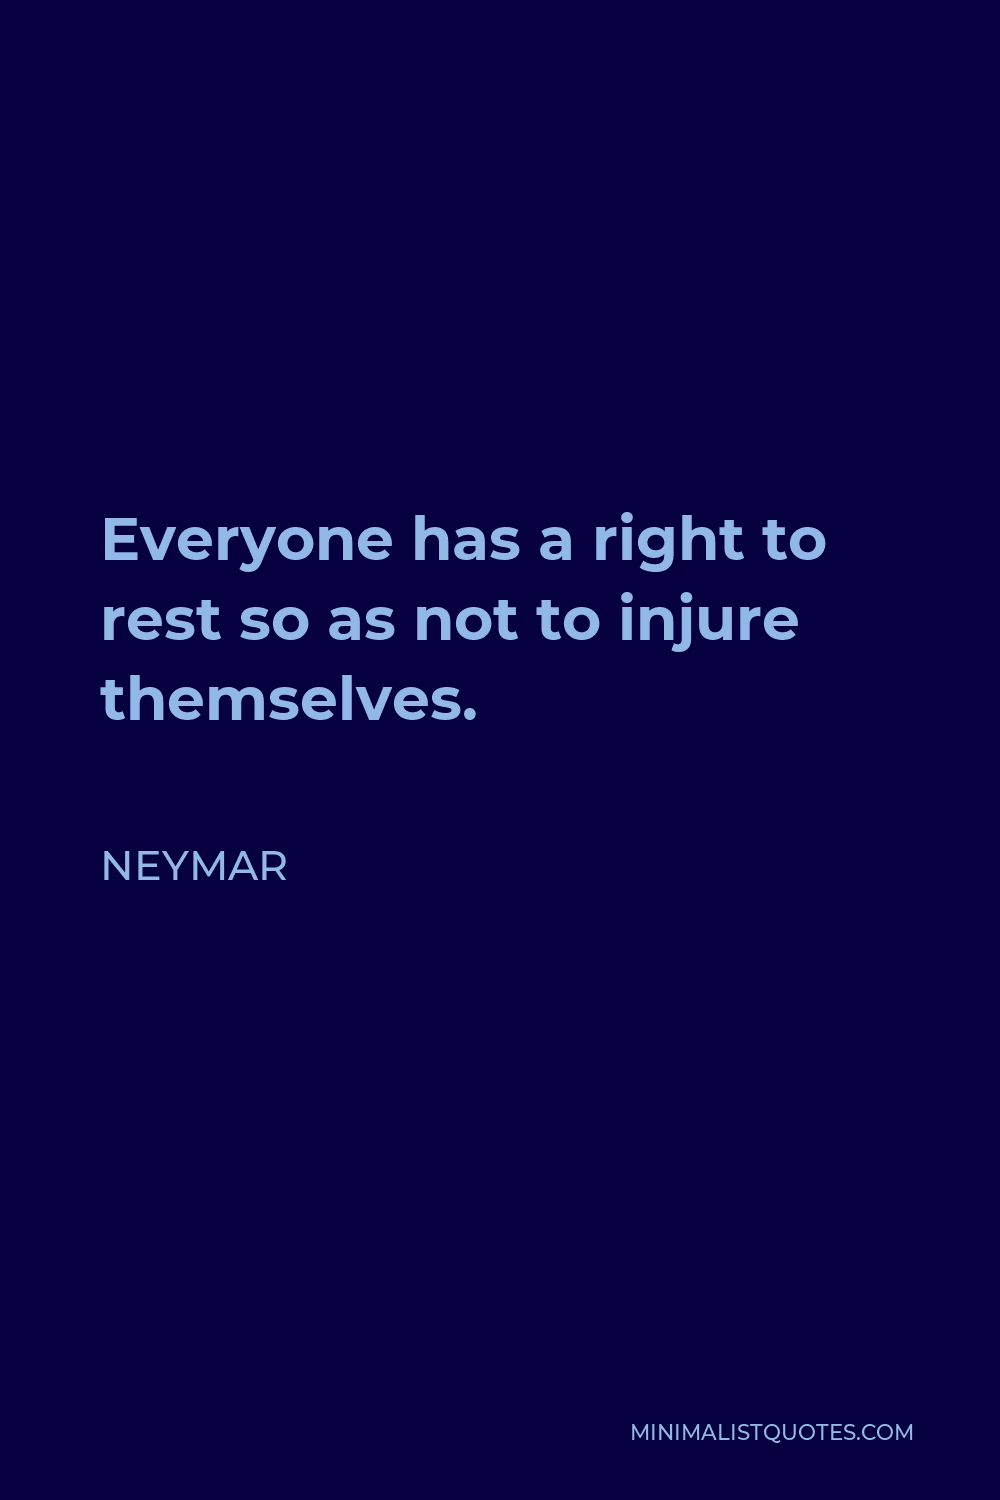 Neymar Quote - Everyone has a right to rest so as not to injure themselves.